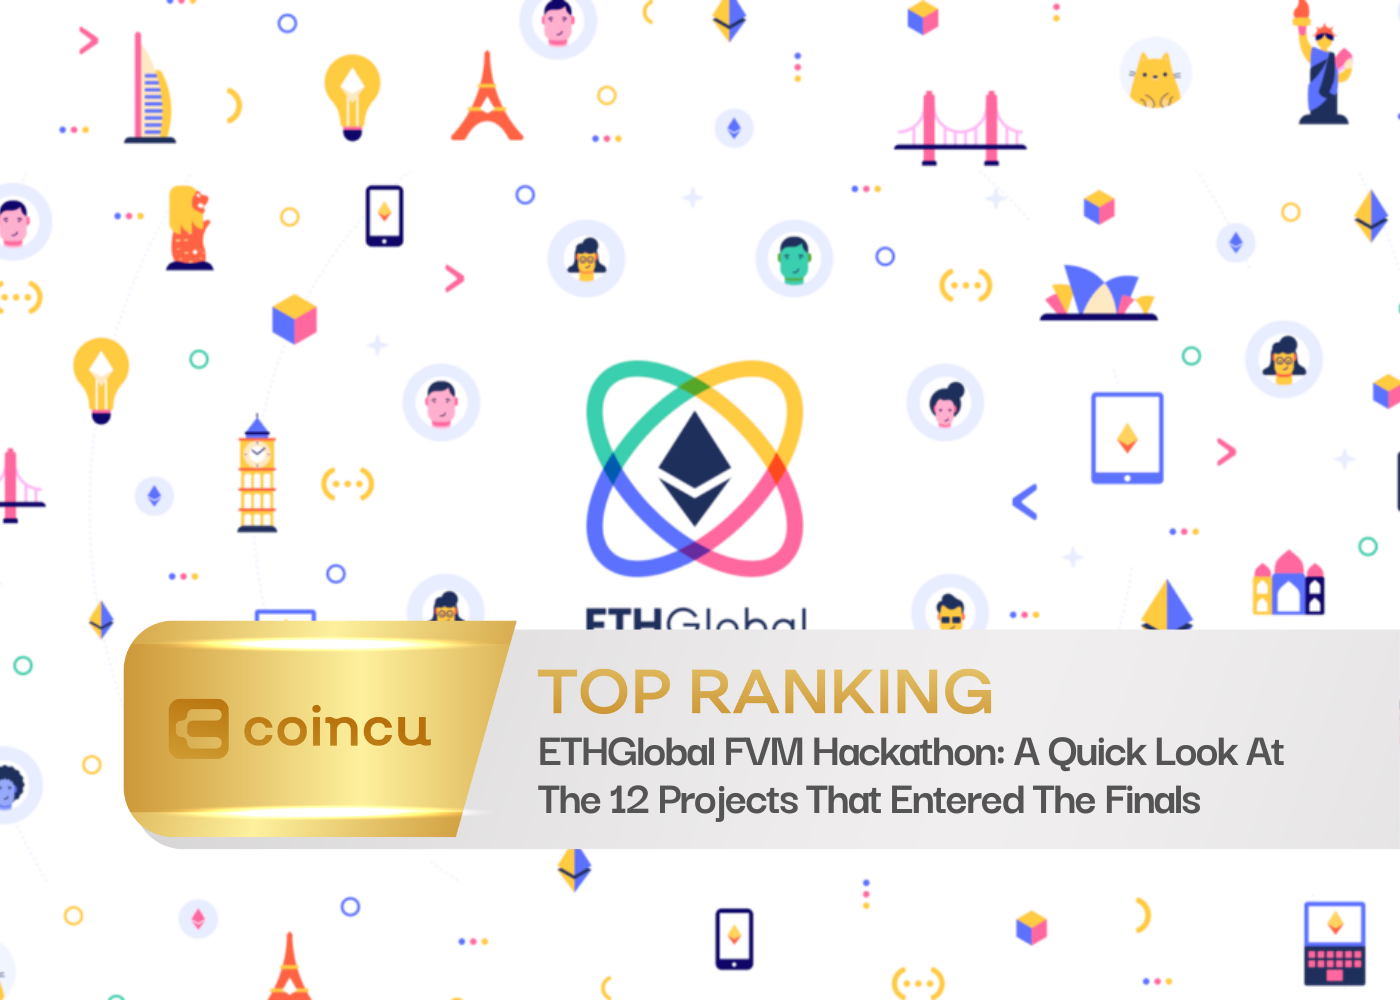 ETHGlobal FVM Hackathon: A Quick Look At The 12 Projects That Entered The Finals